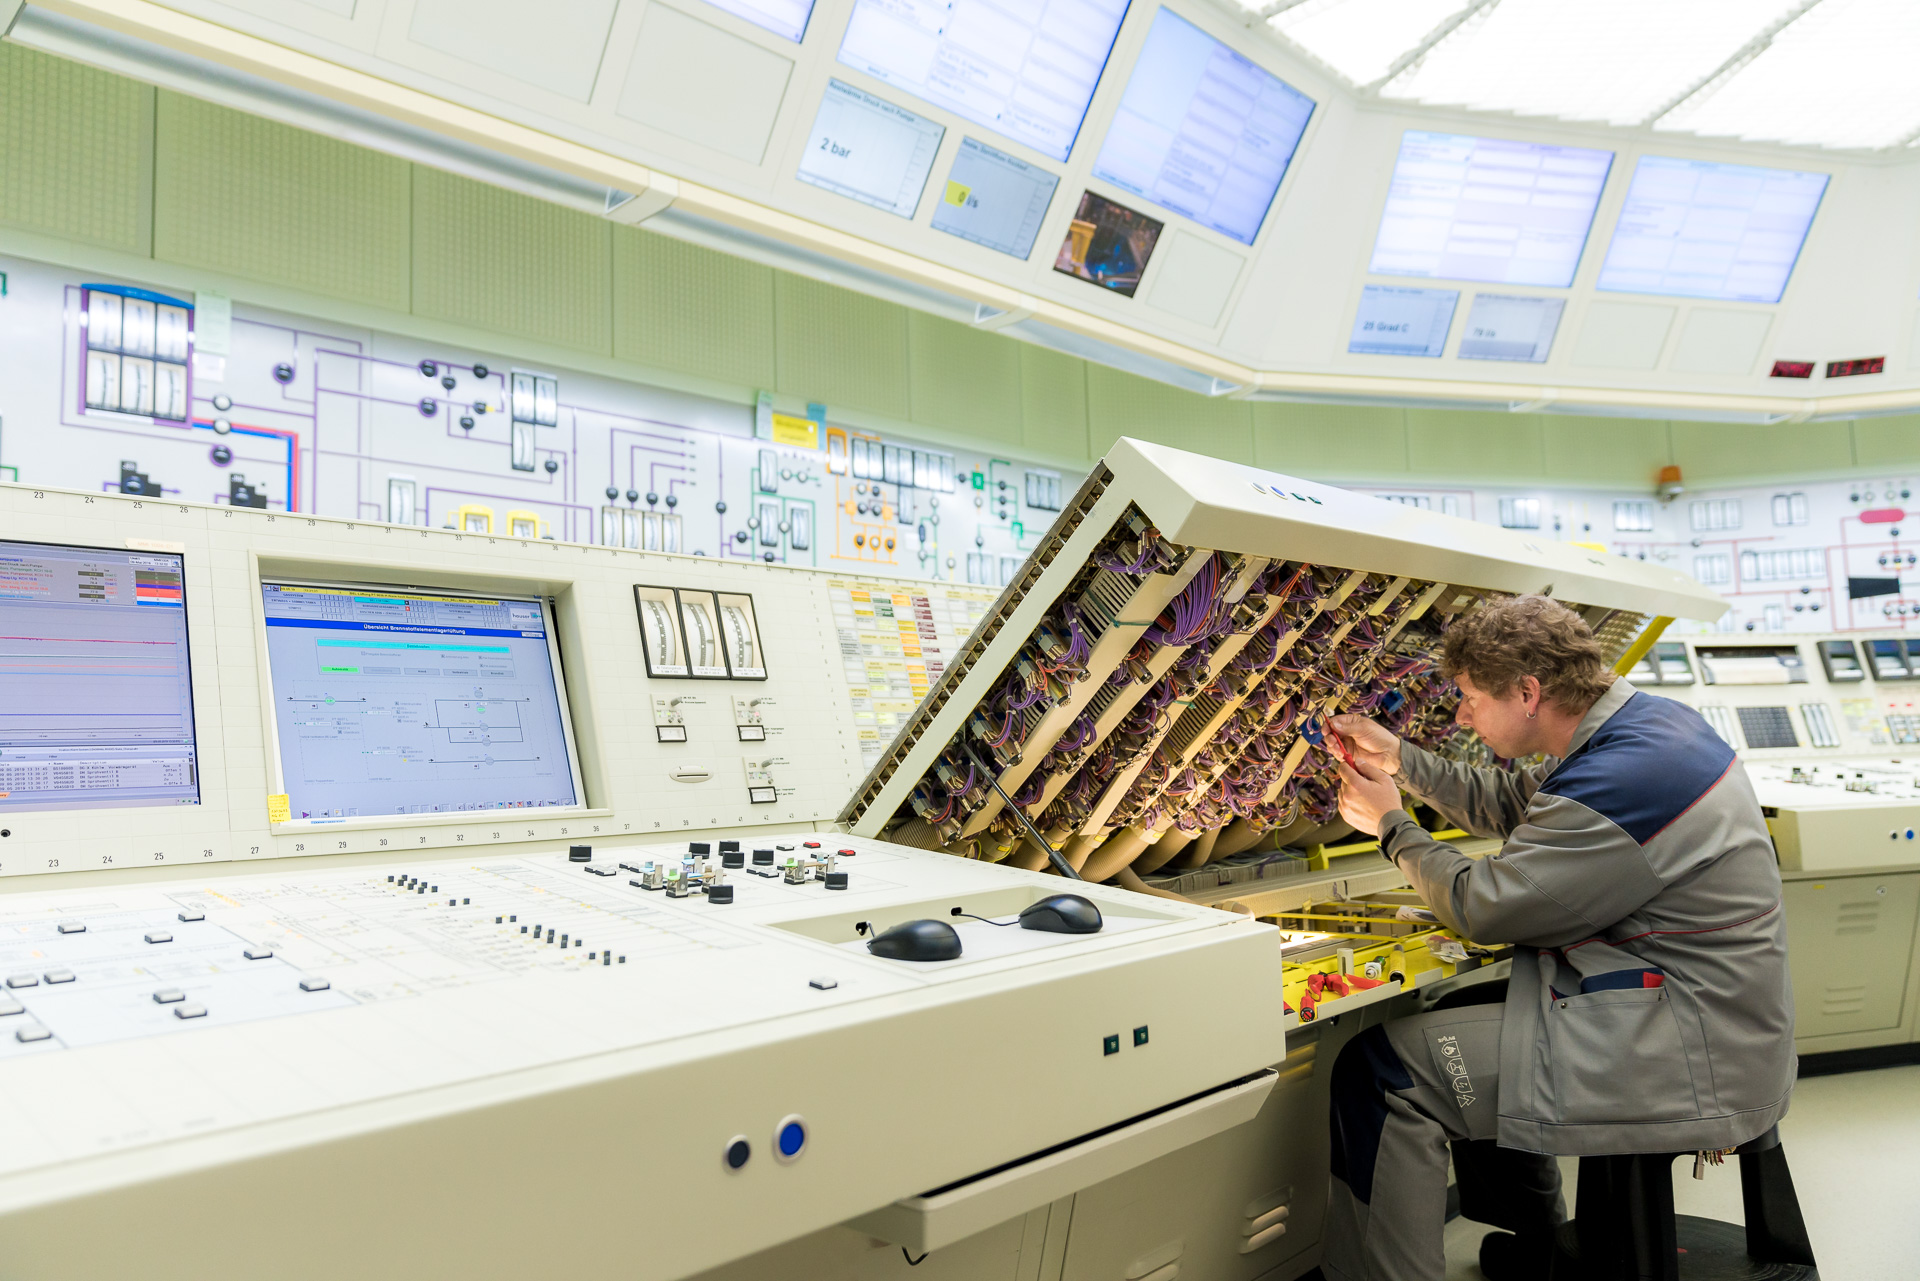 Electrical system maintenance work on a control panel in the main command room.